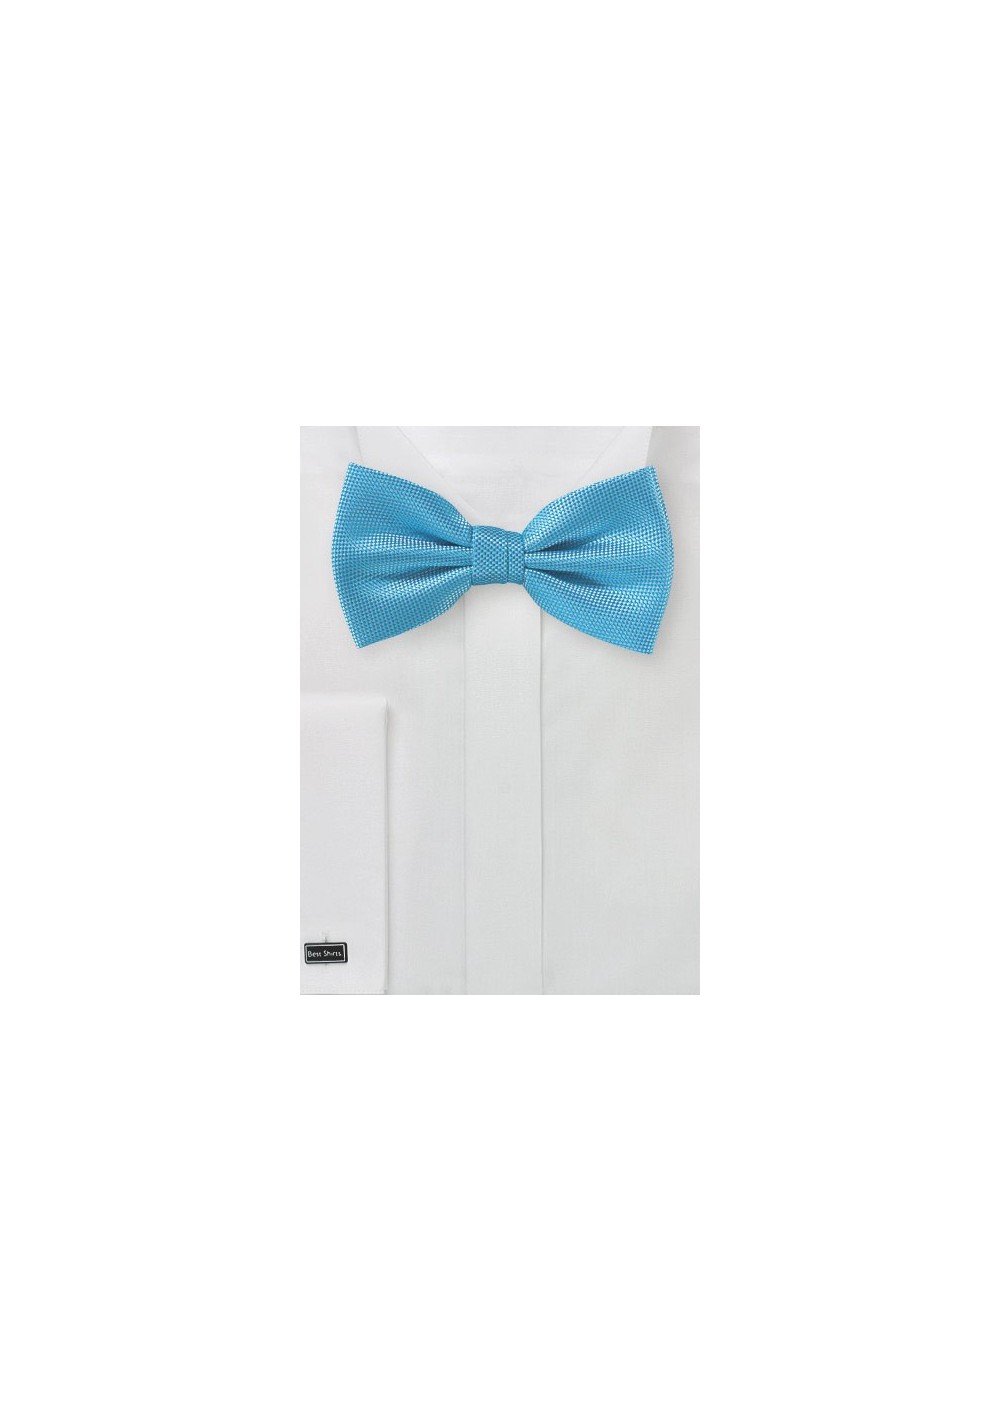 Textured Turquoise Blue Bow Tie